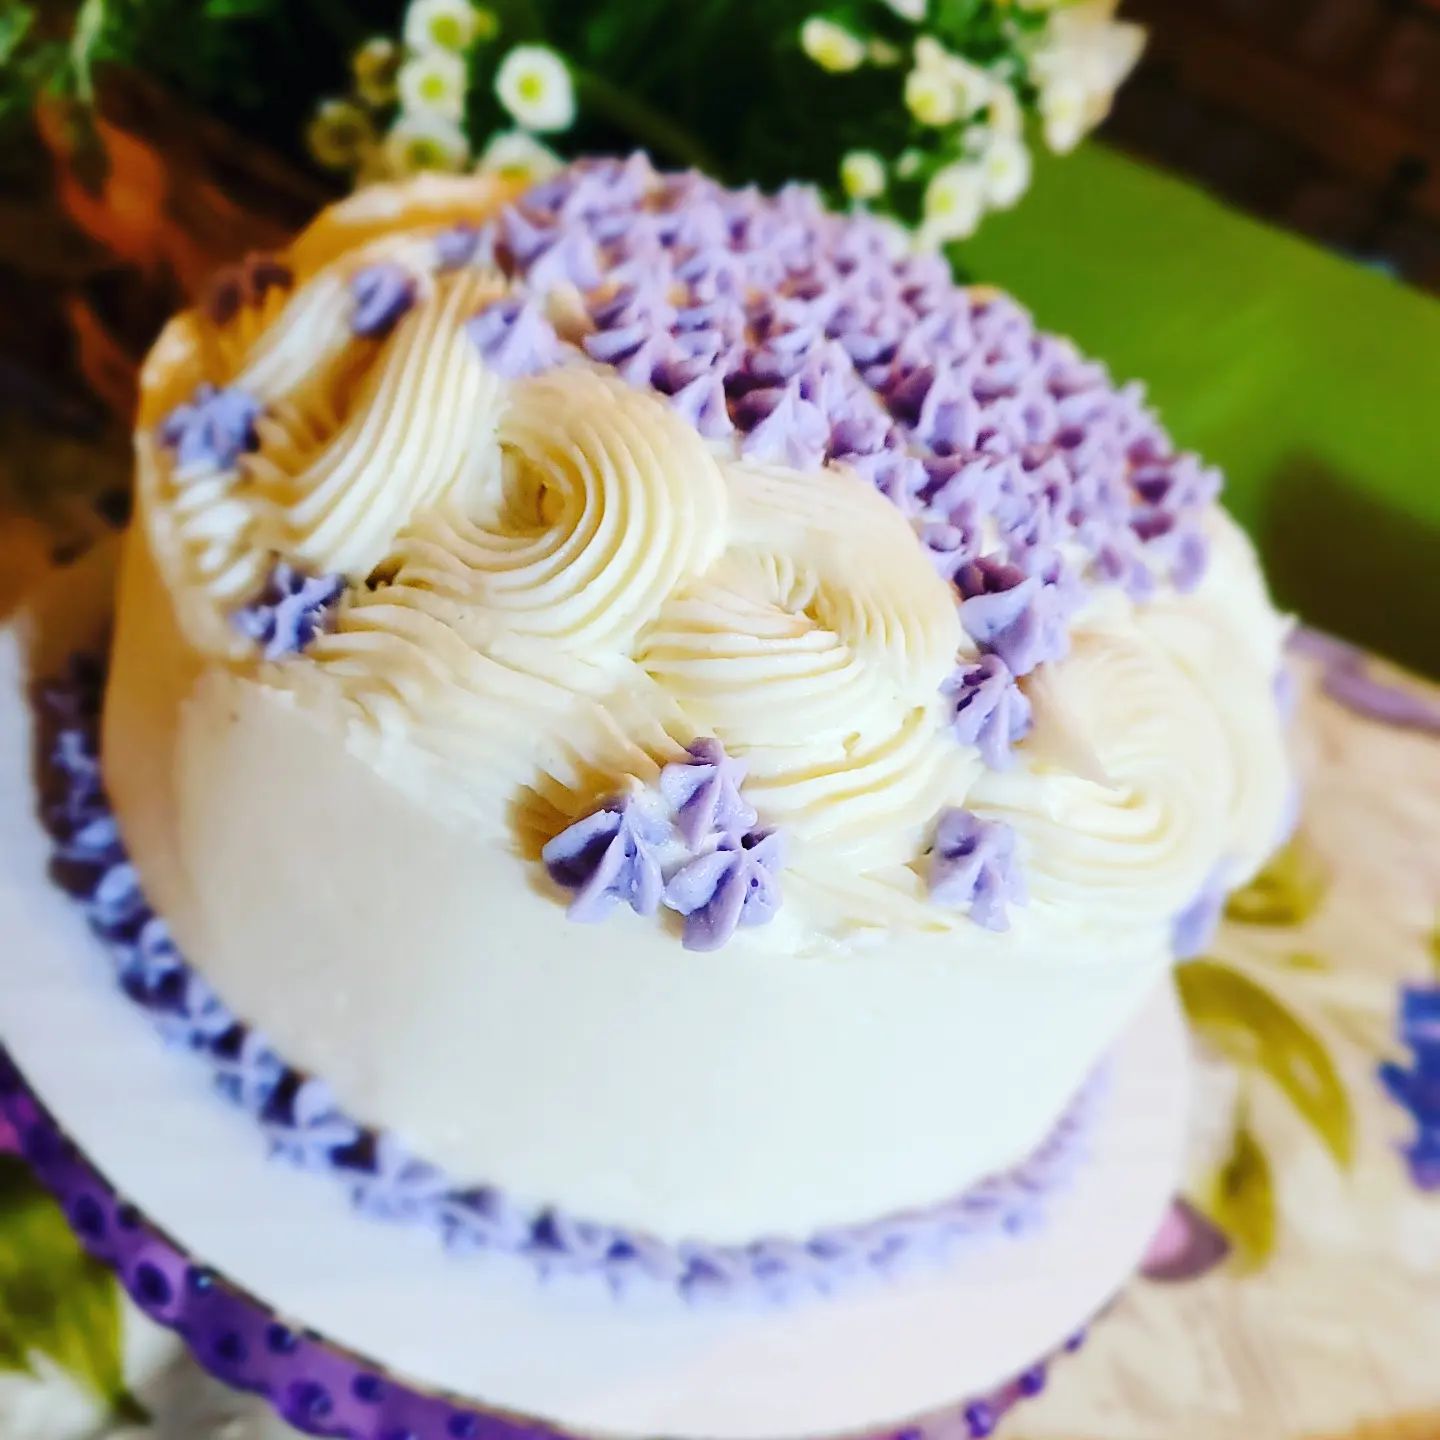 White cake with purple flower details made by Berries & Flour.